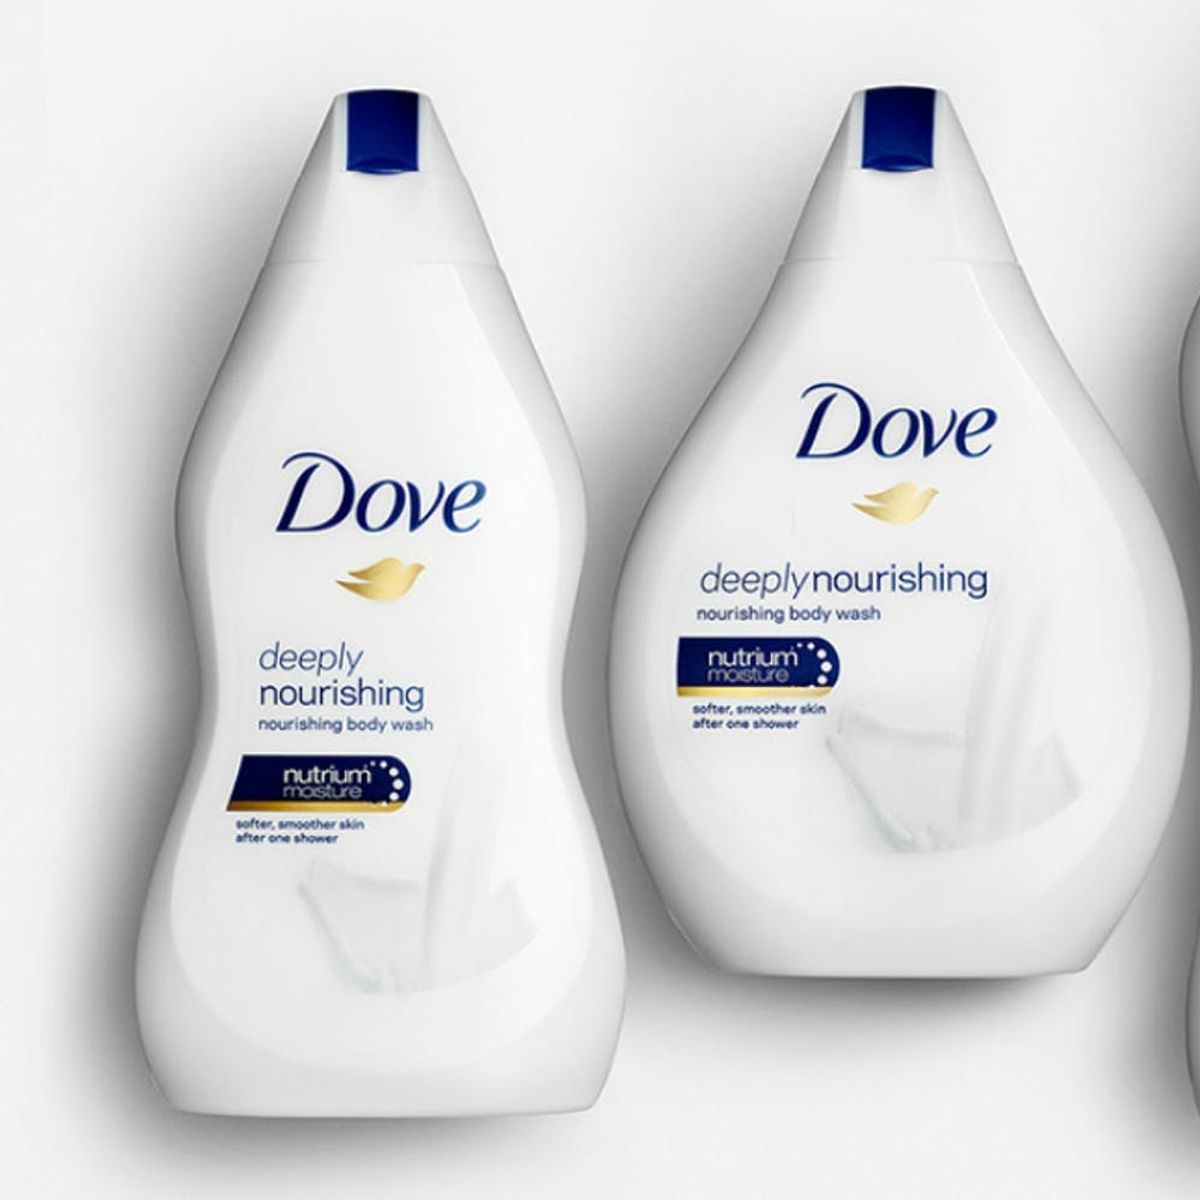 Twitter Is Dragging Dove for Their Body Shape Body Wash Bottles